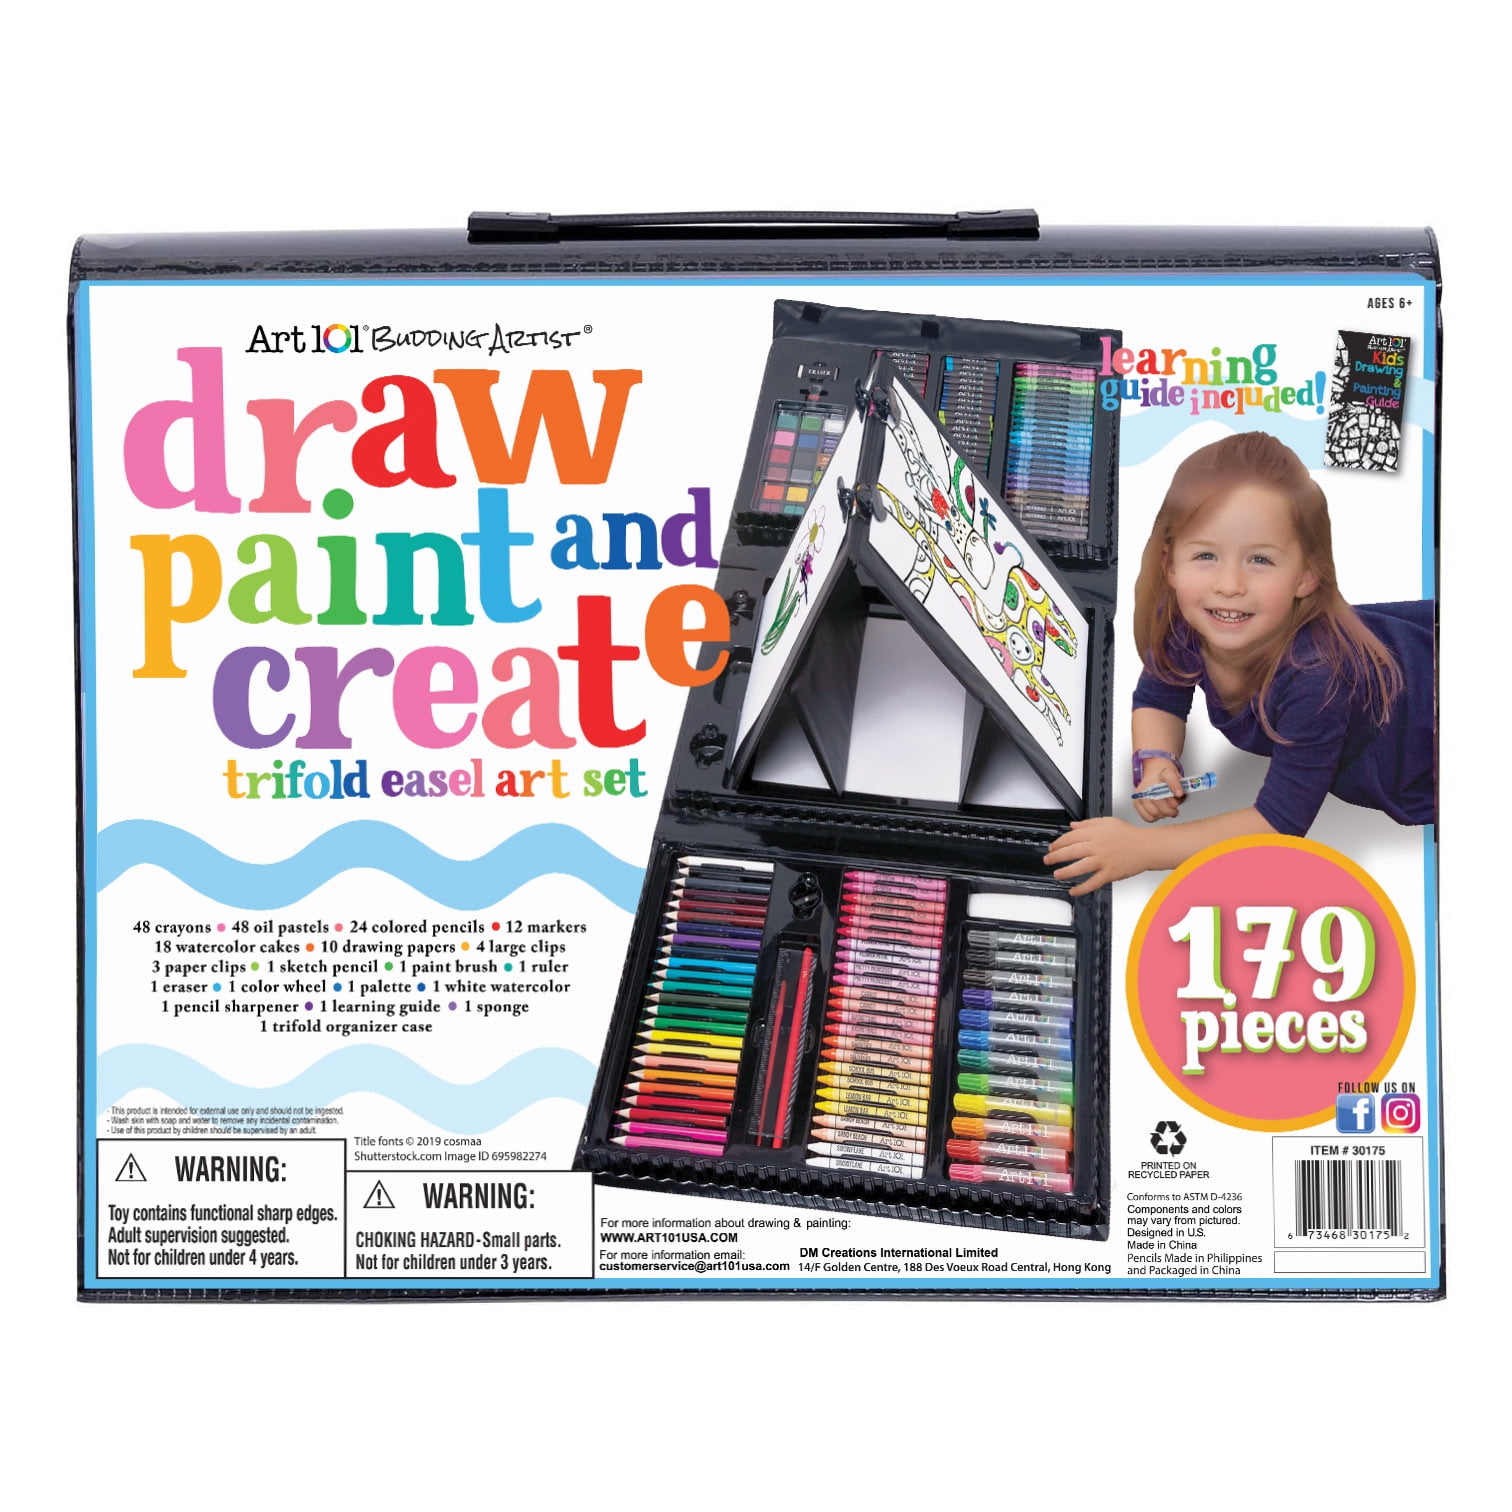  Crayola Masterworks Art Case (200+ Pcs), Art Set For Kids,  Markers, Paints, Colored Pencils, & Crayons, Holiday Gift for Kids, Toys,  4+ : Toys & Games